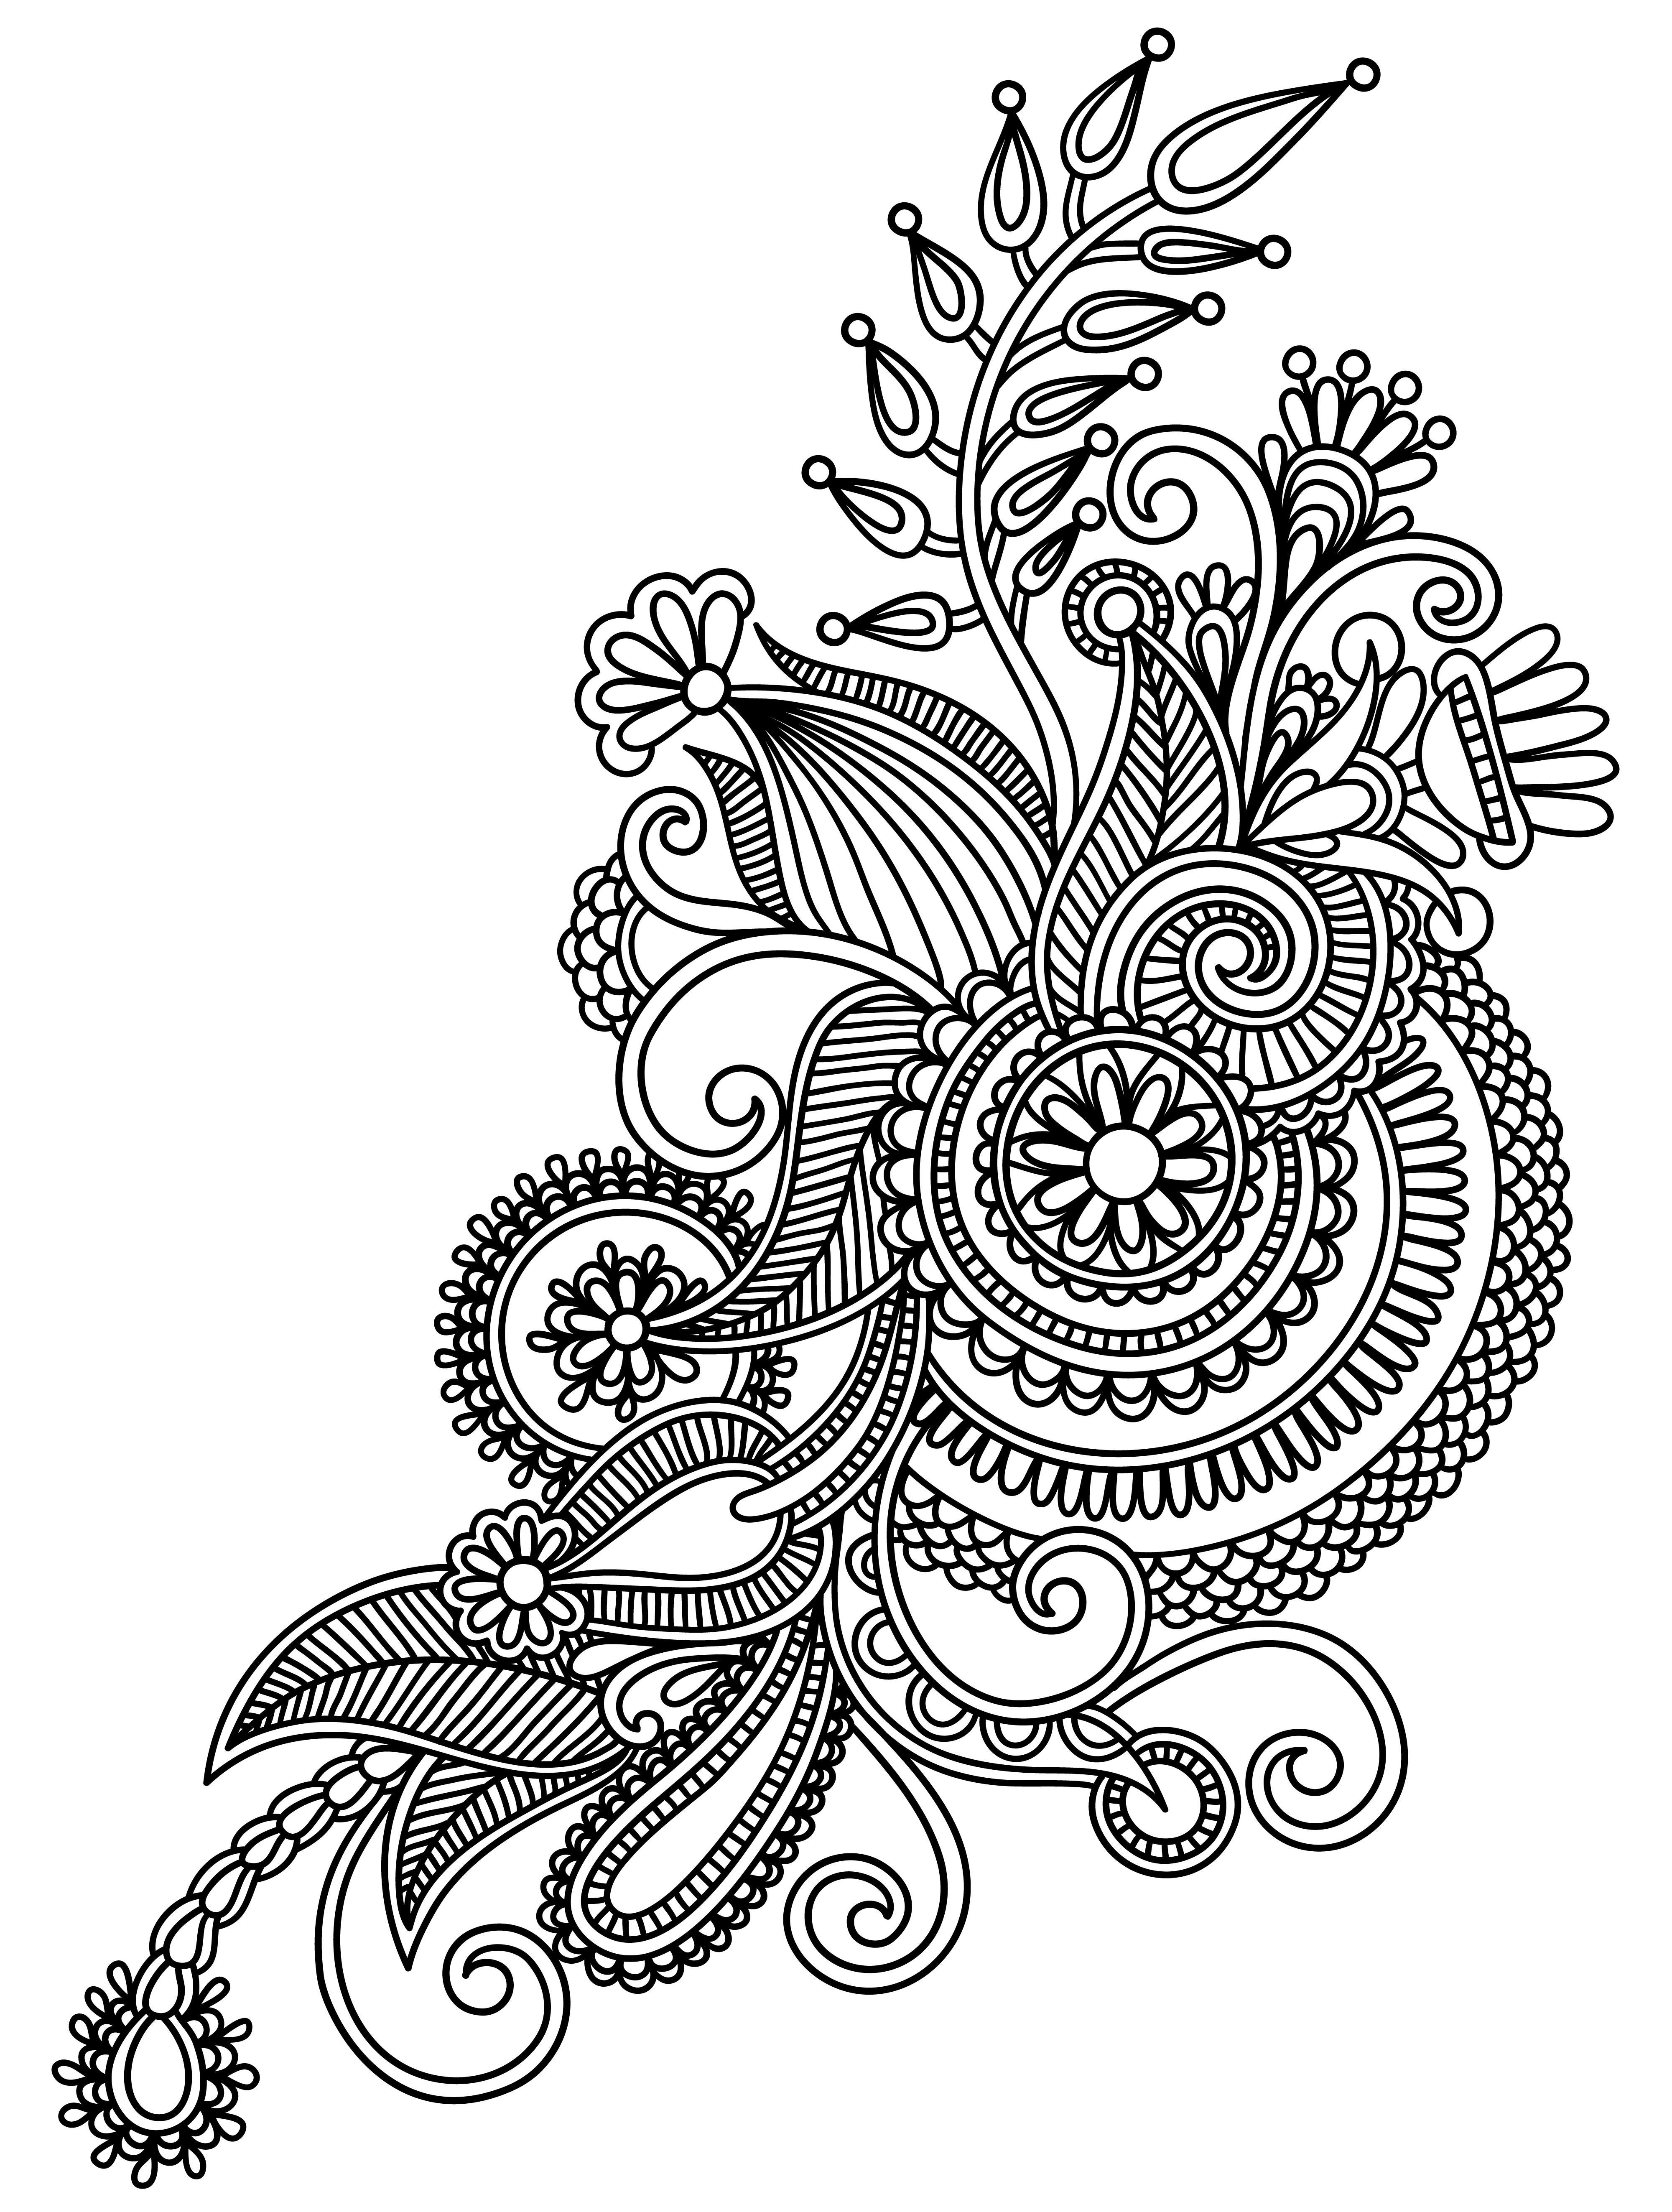 Mandala Coloring Pages Expert Level.